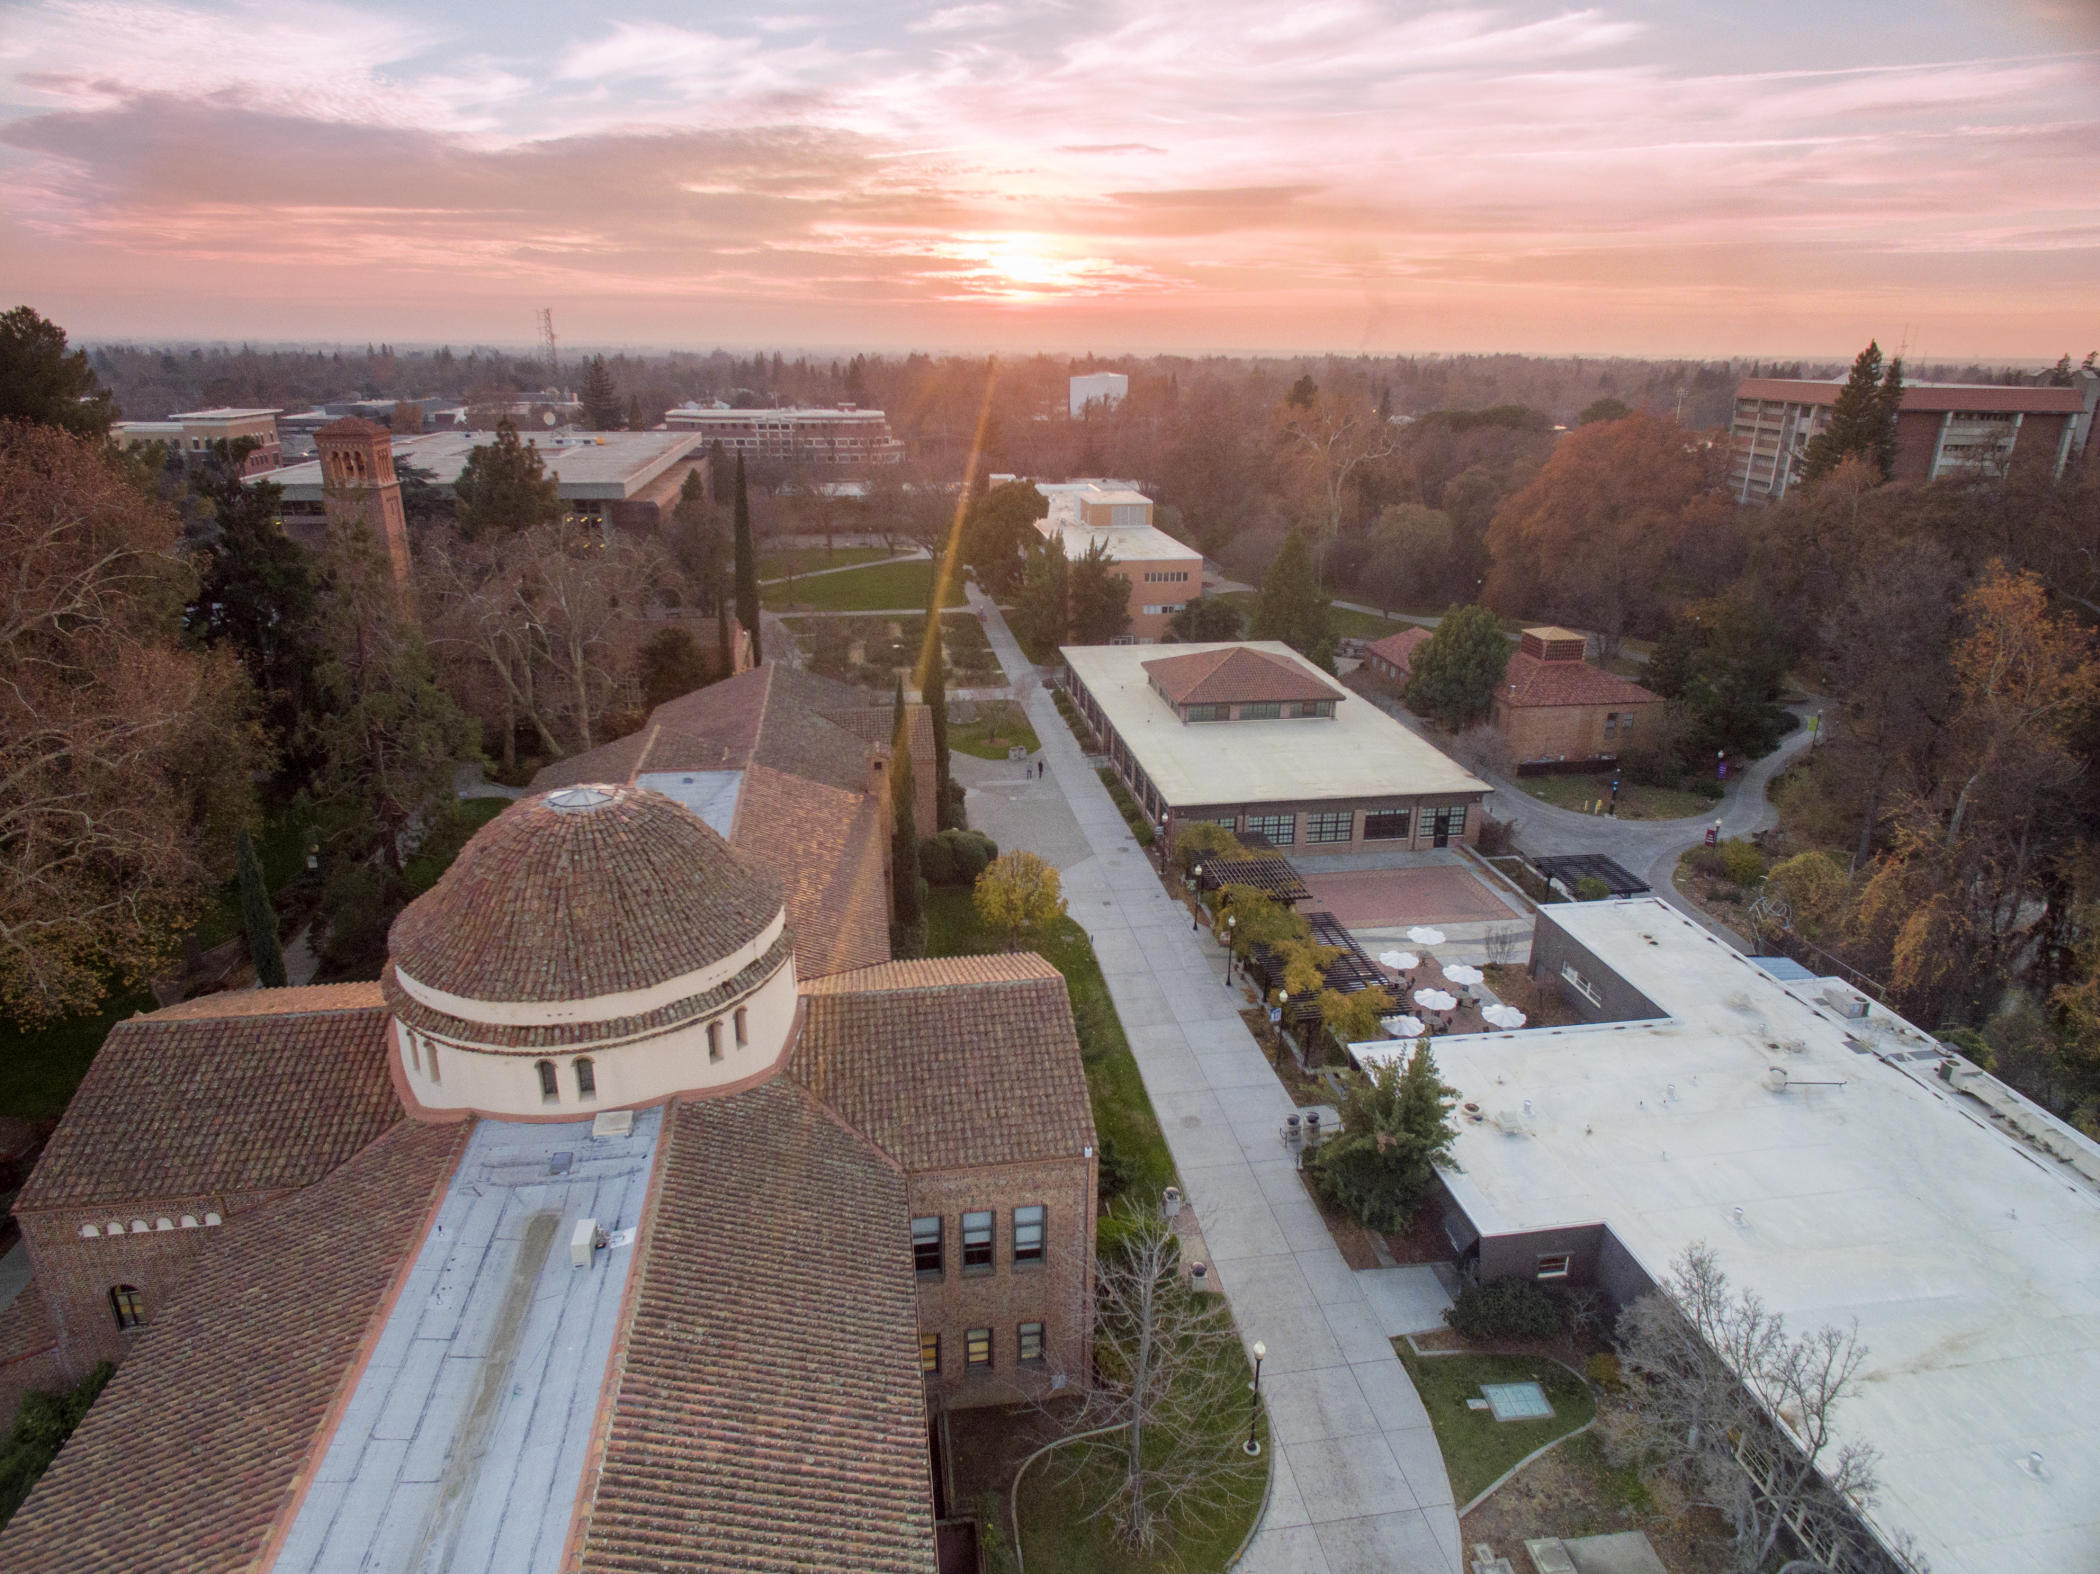 A sunset over campus is seen in December 2017.